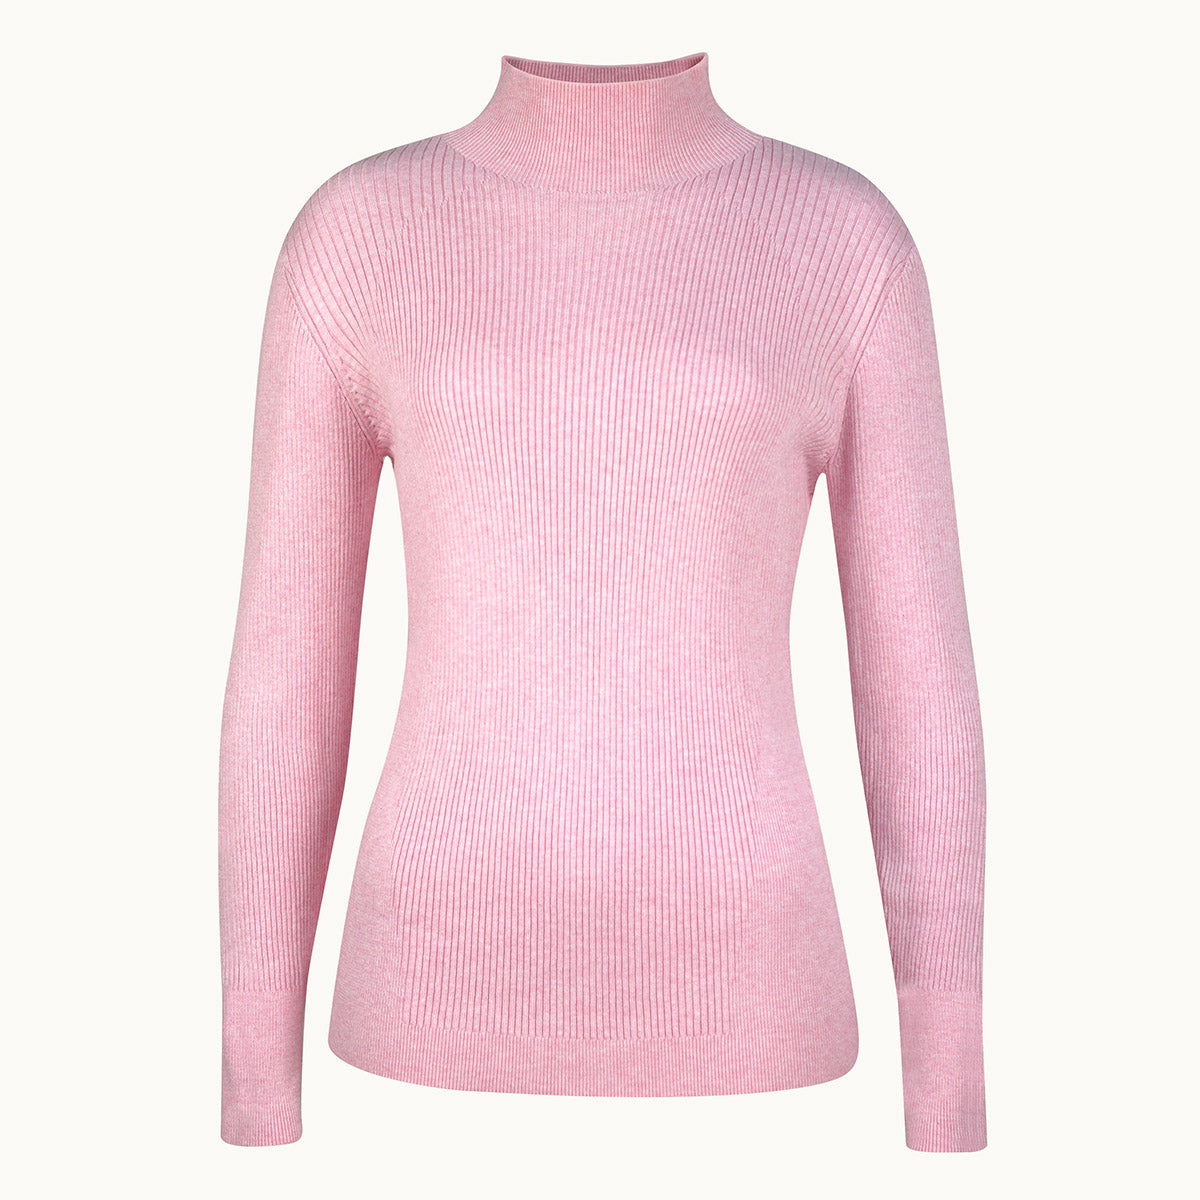 Callaway Ladies High Mock Neck Ribbed Sweater in Pink Nectar Heather